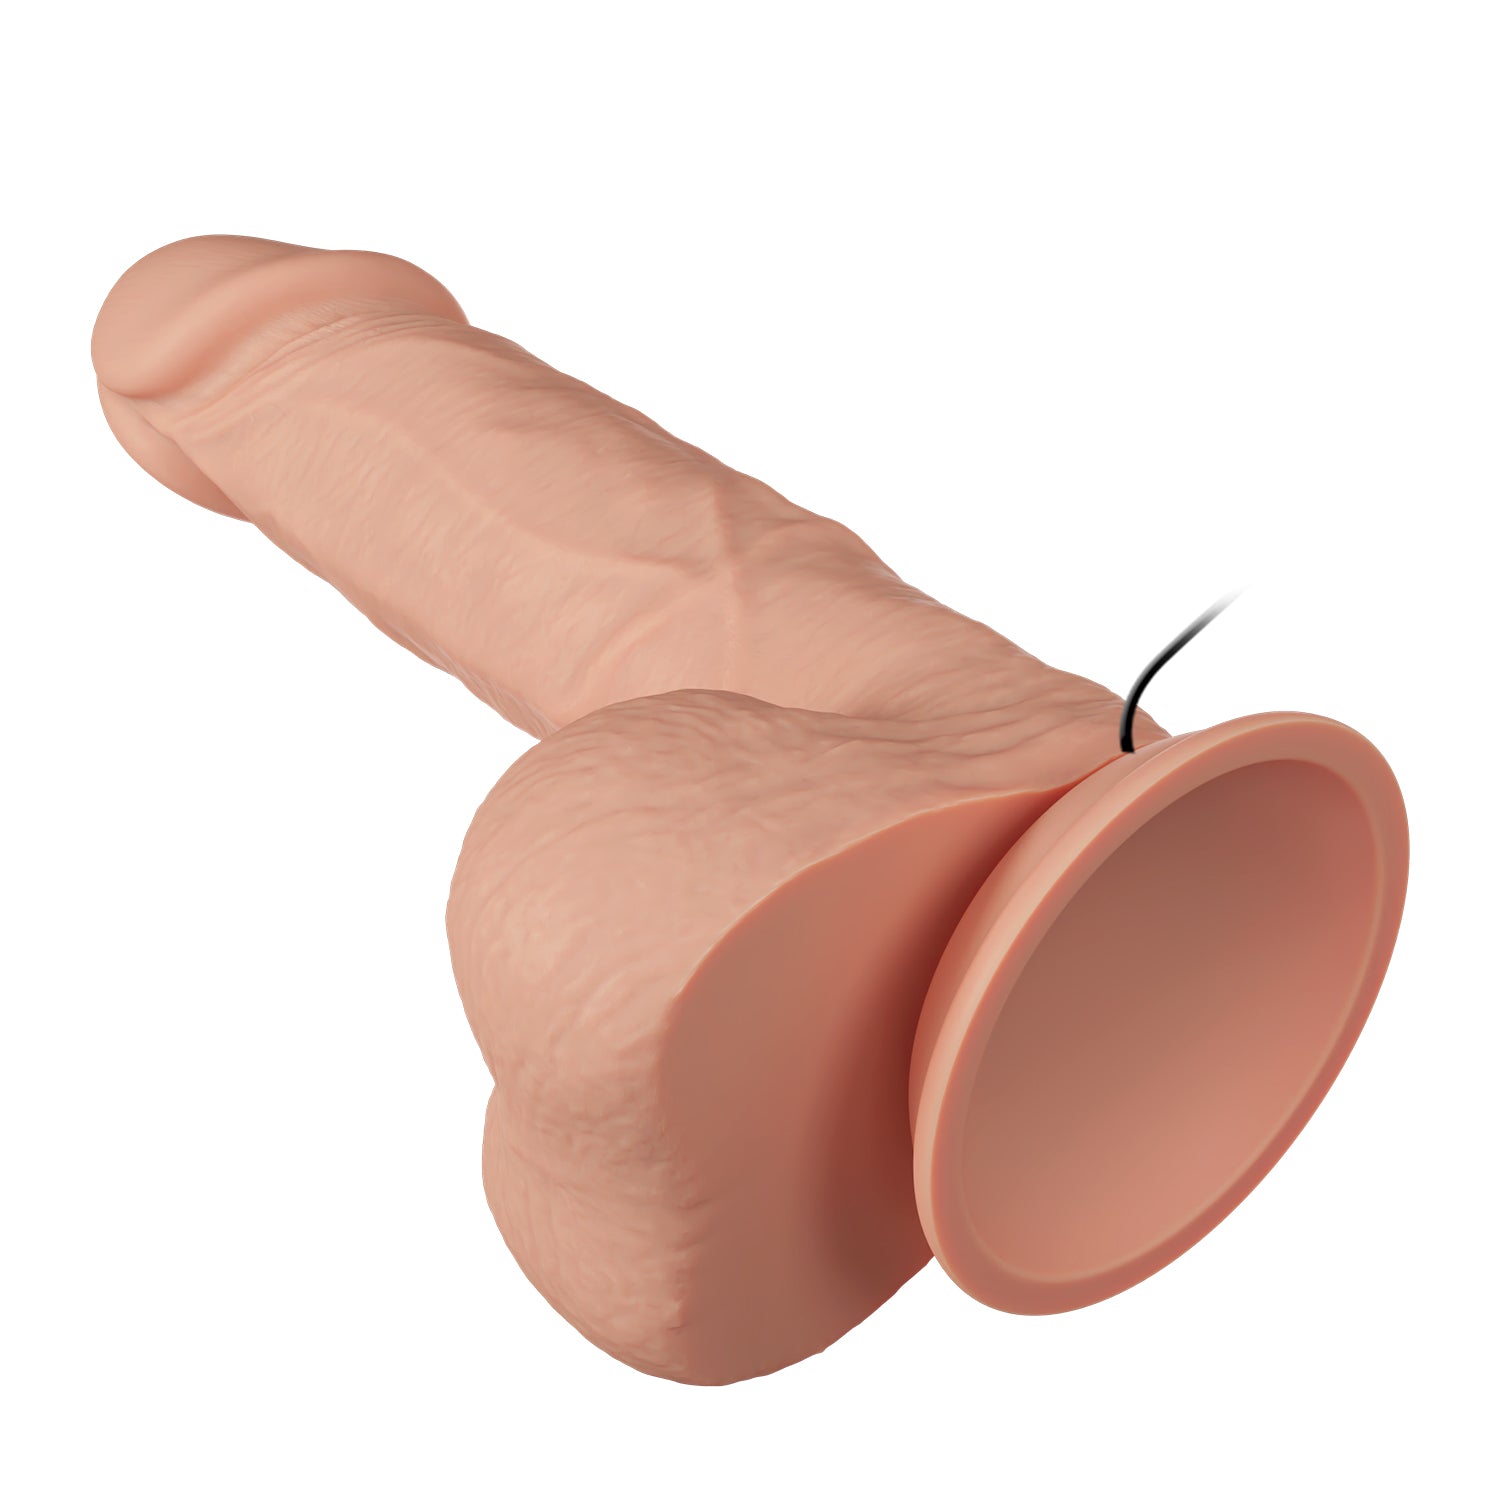 Baile 8.5 Inch Lifelike Vibrating Dildo with Suction Cup in Flesh